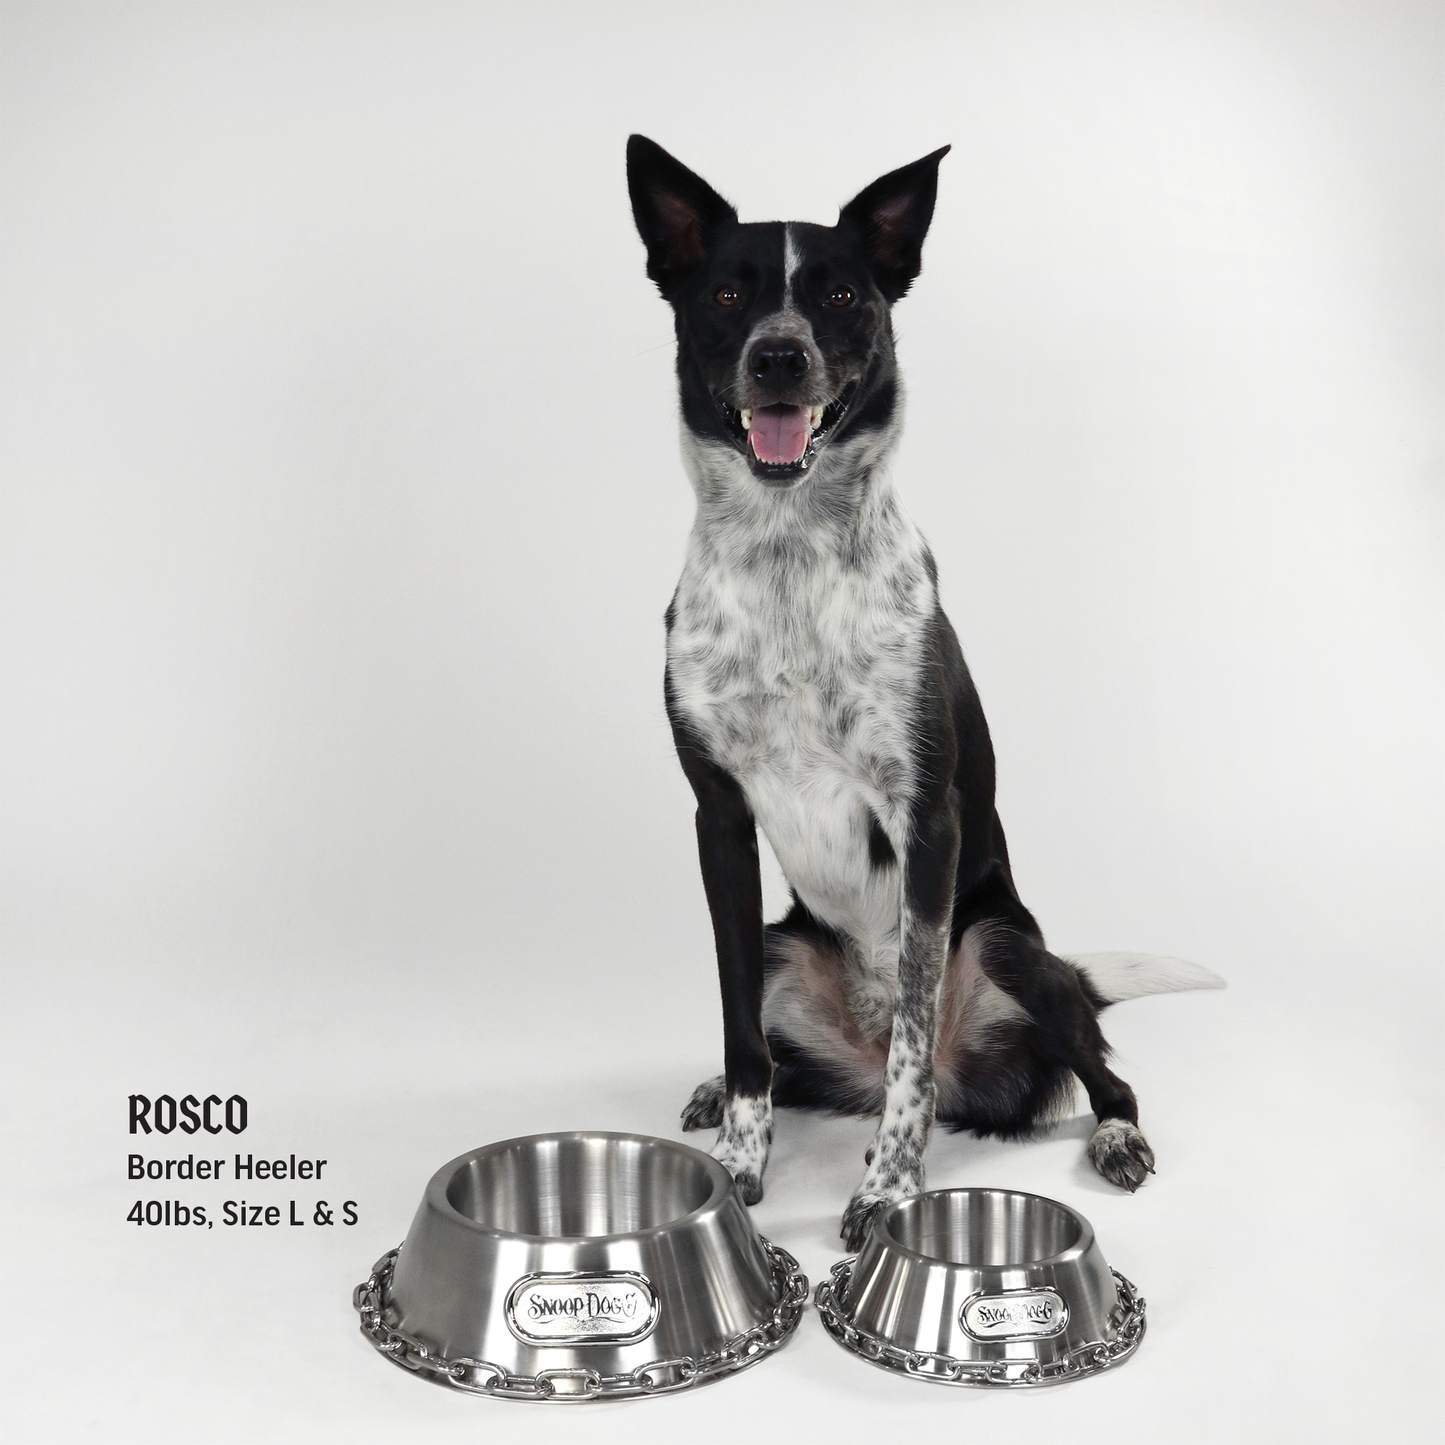 Rosco the Border Heeler sitting behind the Large and Small Deluxe Silver Pet Bowl.